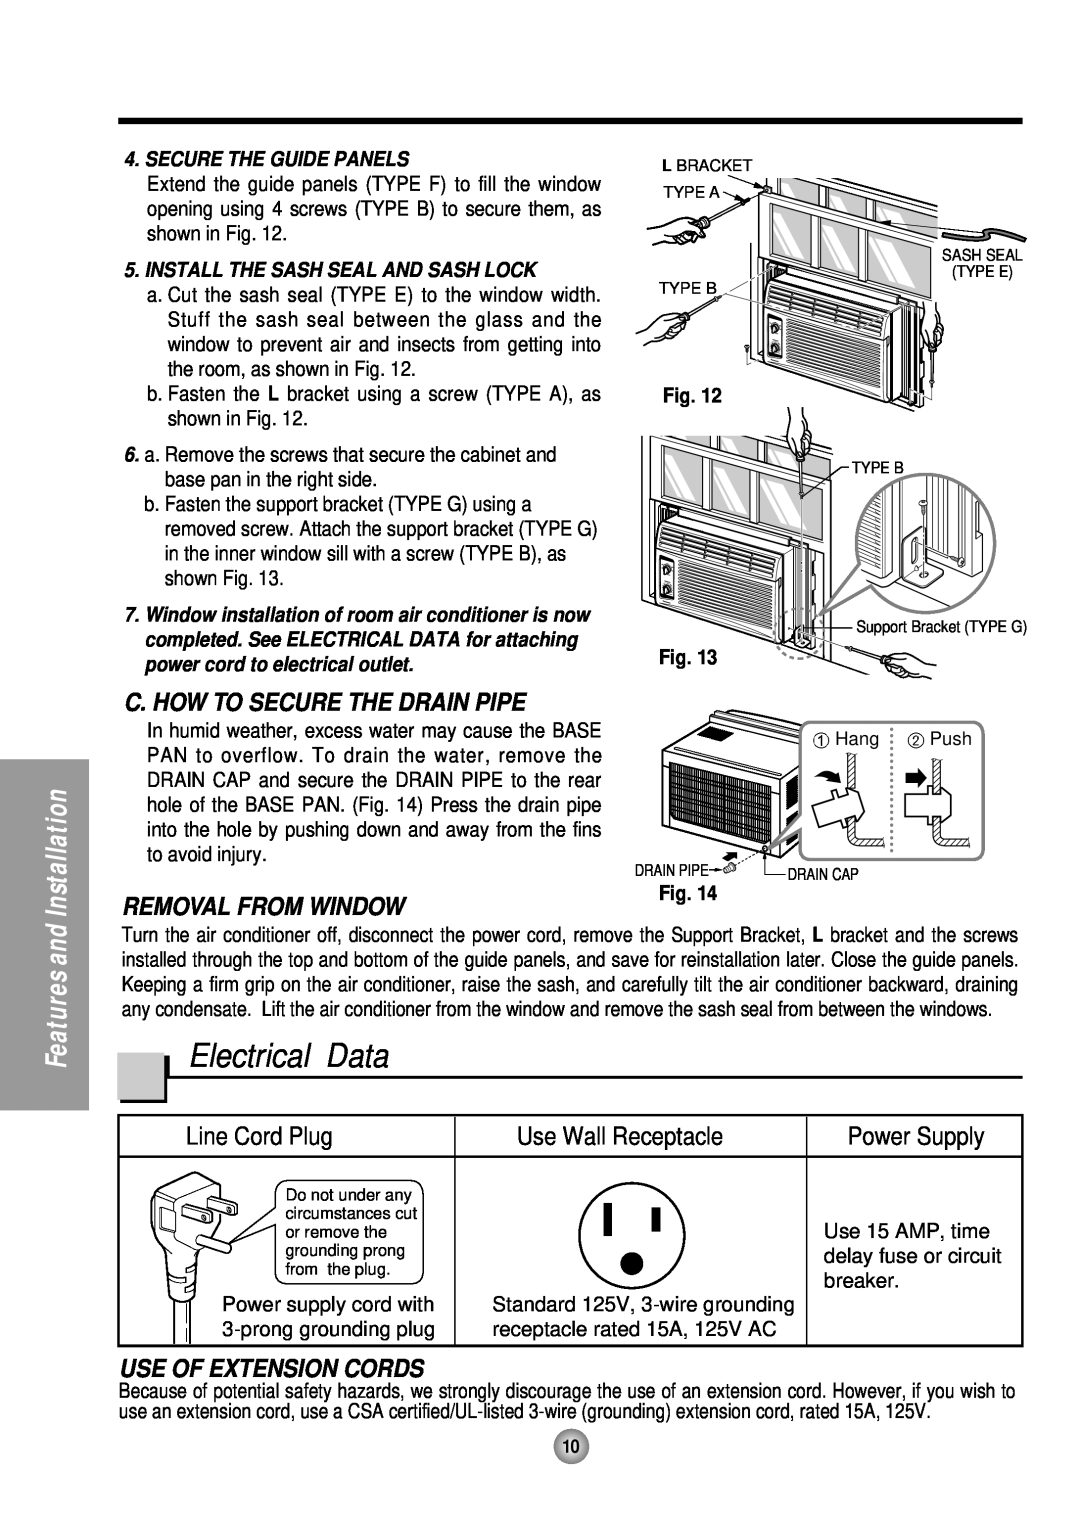 Panasonic CW-C53HU Electrical Data, C. How To Secure The Drain Pipe, Removal From Window, Line Cord Plug, Power Supply 